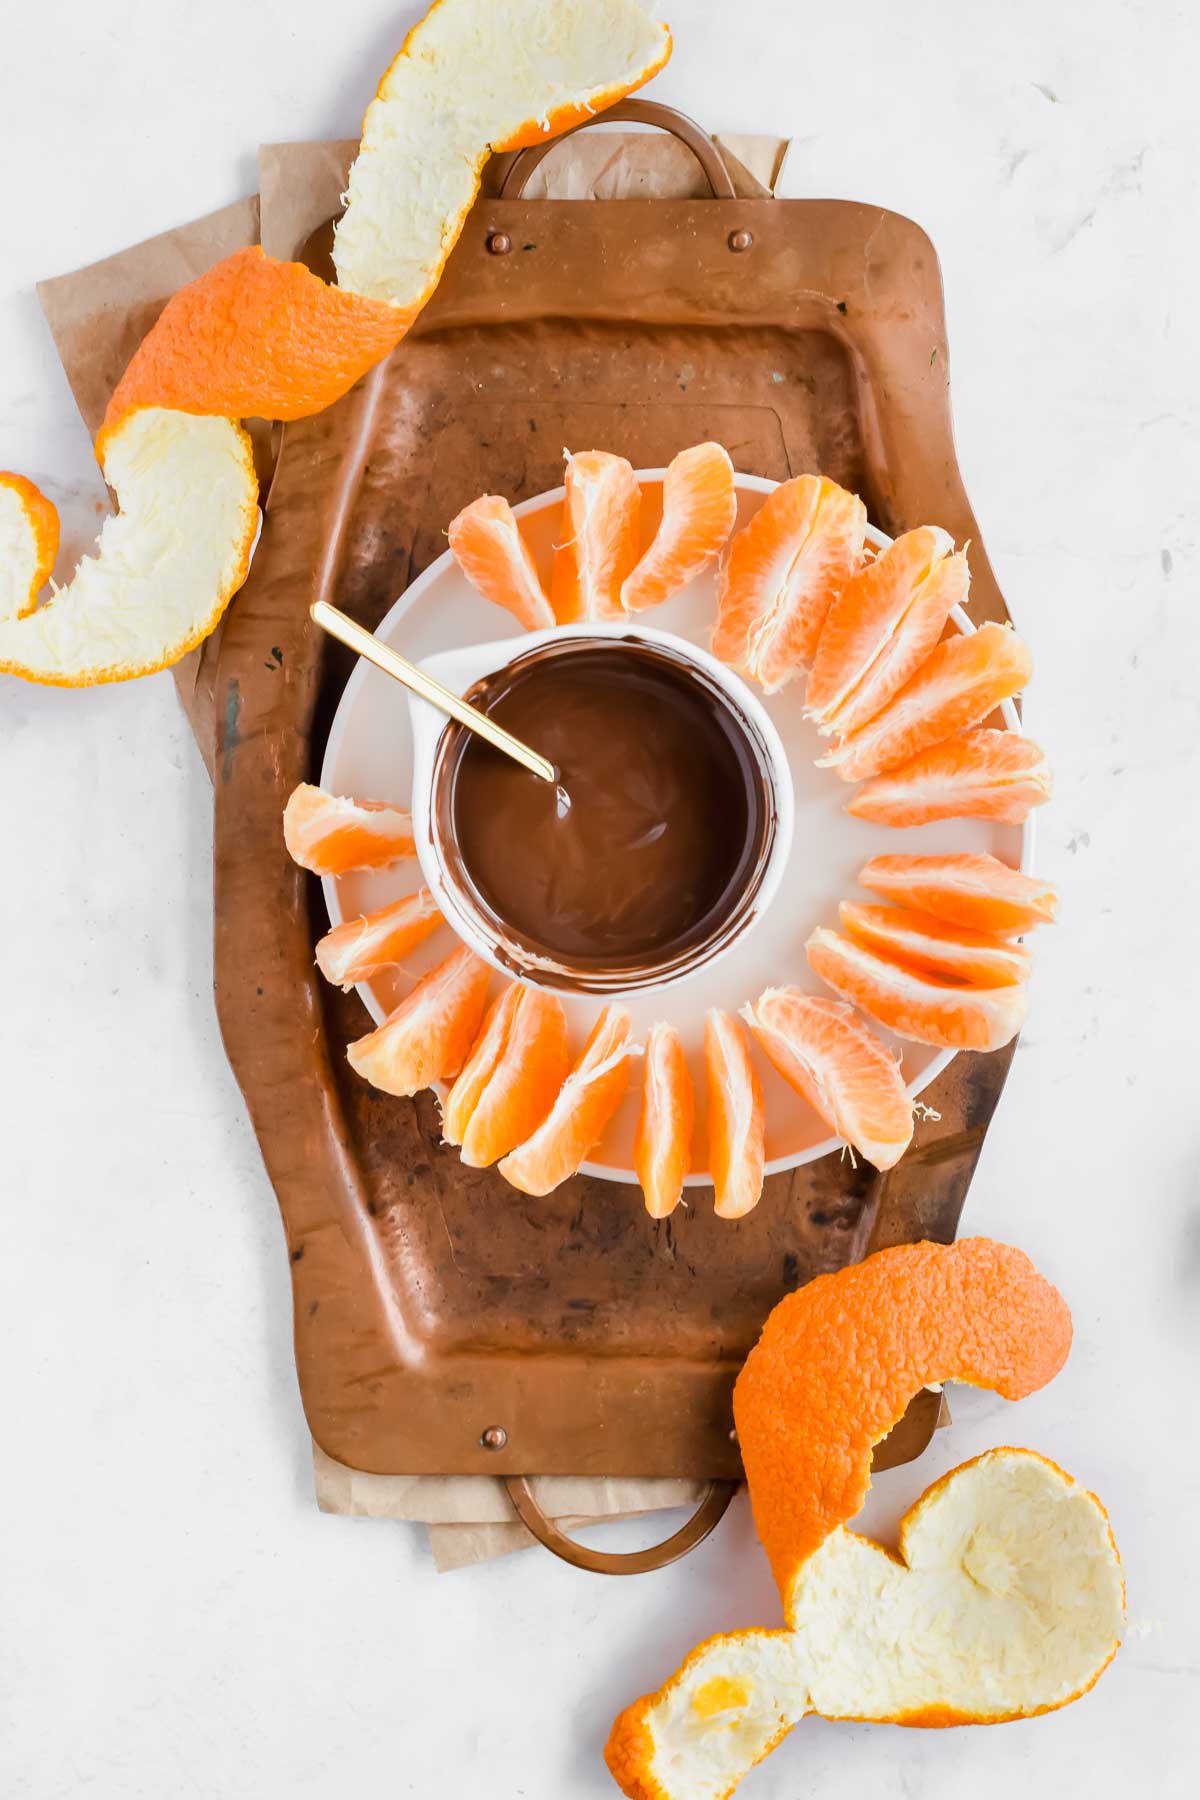 Orange slices surrounding a bowl of melted chocolate with a spoon on a plate.